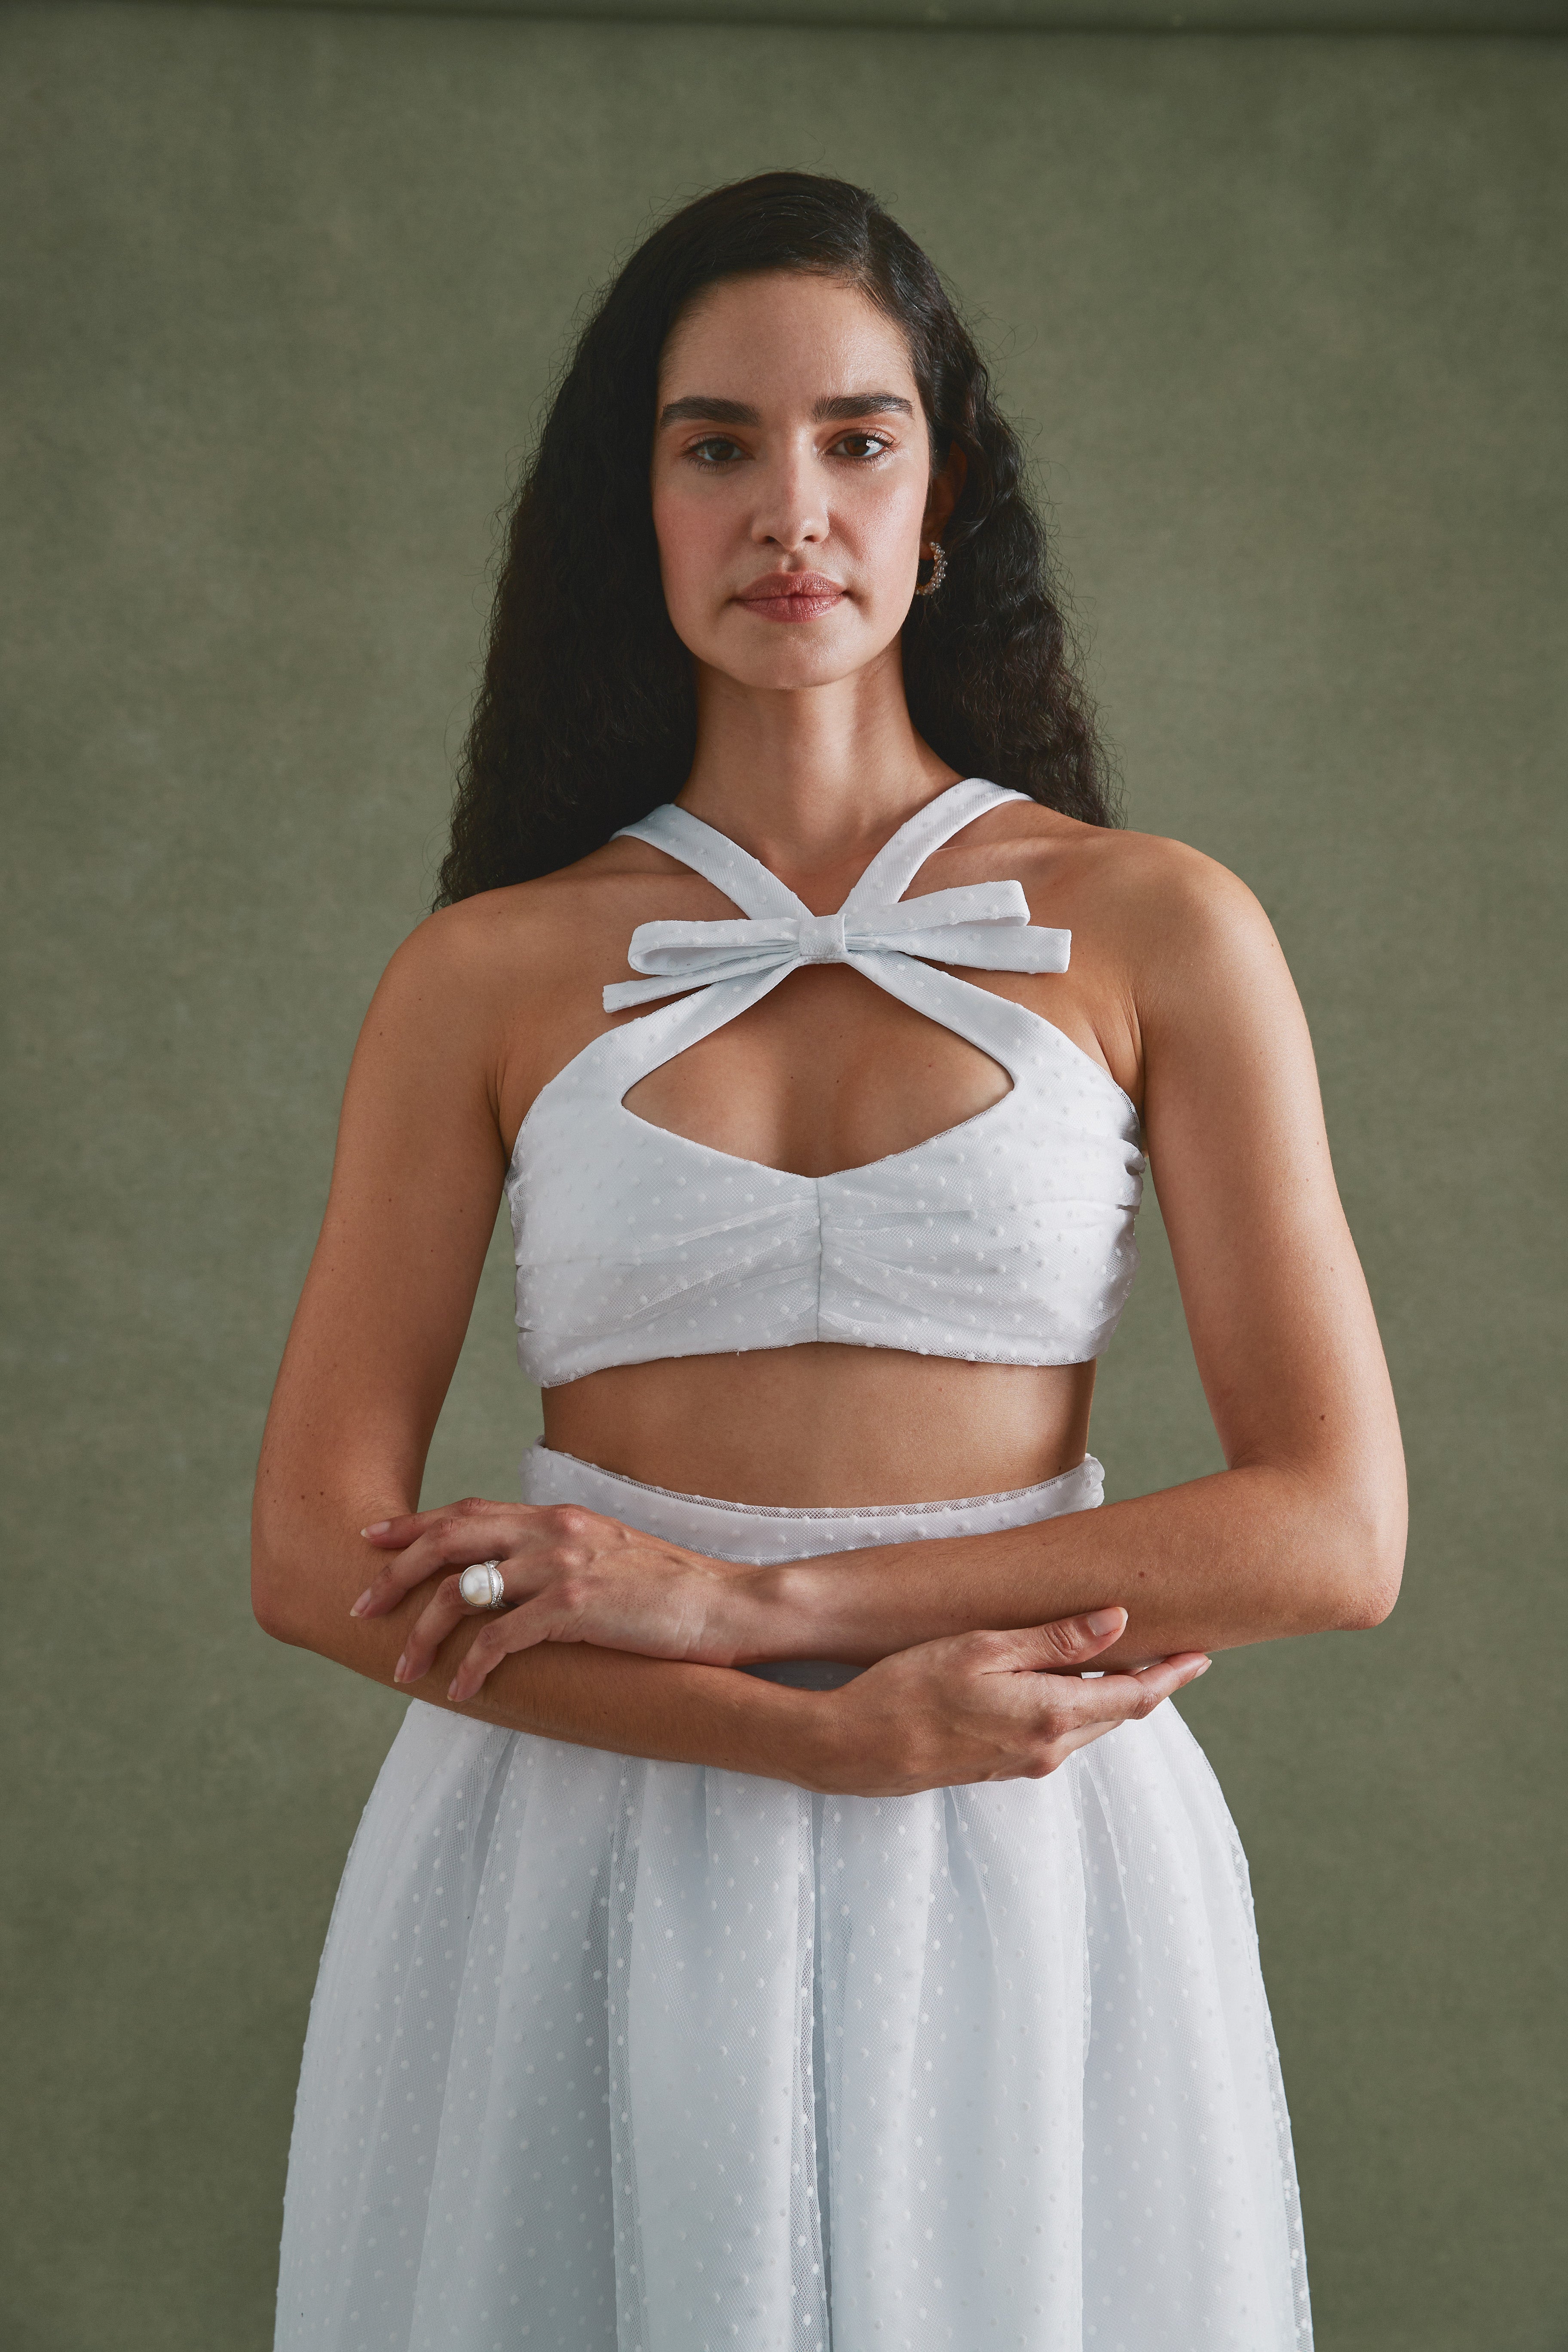 Alexandra Pijut Olivia Bow Set. Skirt and bra top with bow in polka dot, flocked tulle. Bridal, wedding dress, bride, rehearsal dinner, after party outfit.